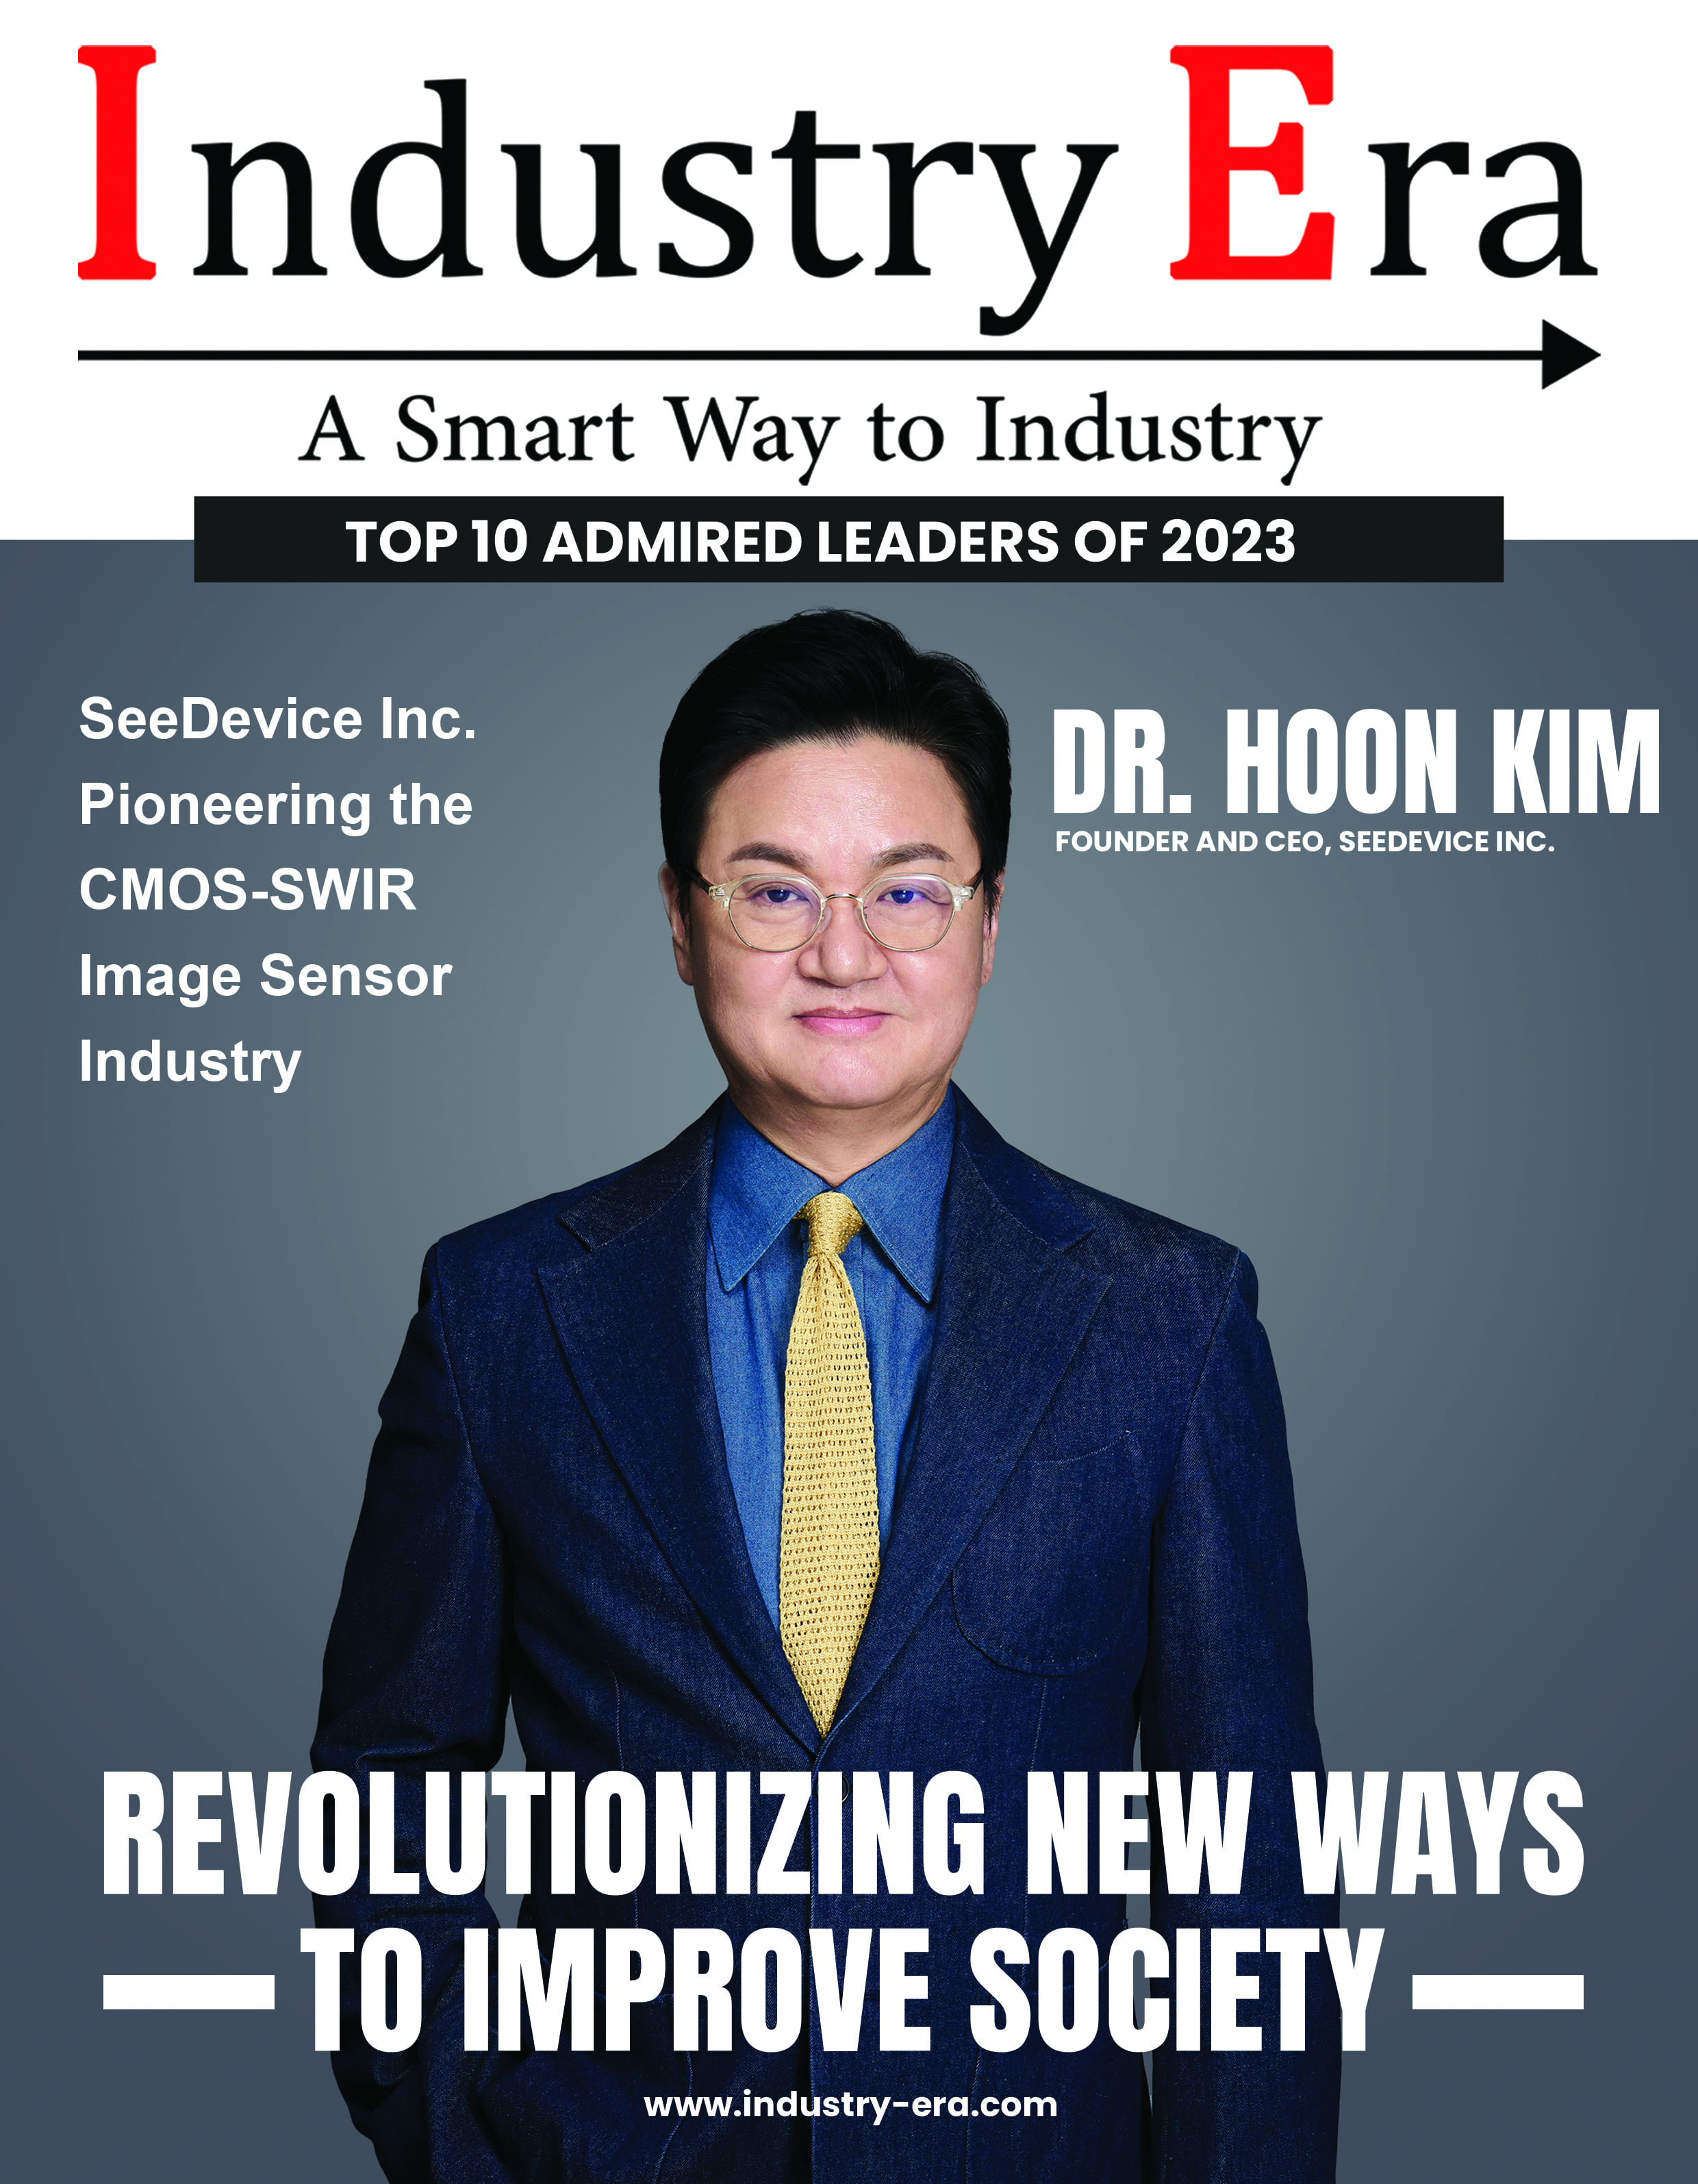 Top 10 Admired Leaders of 2023 Magazine